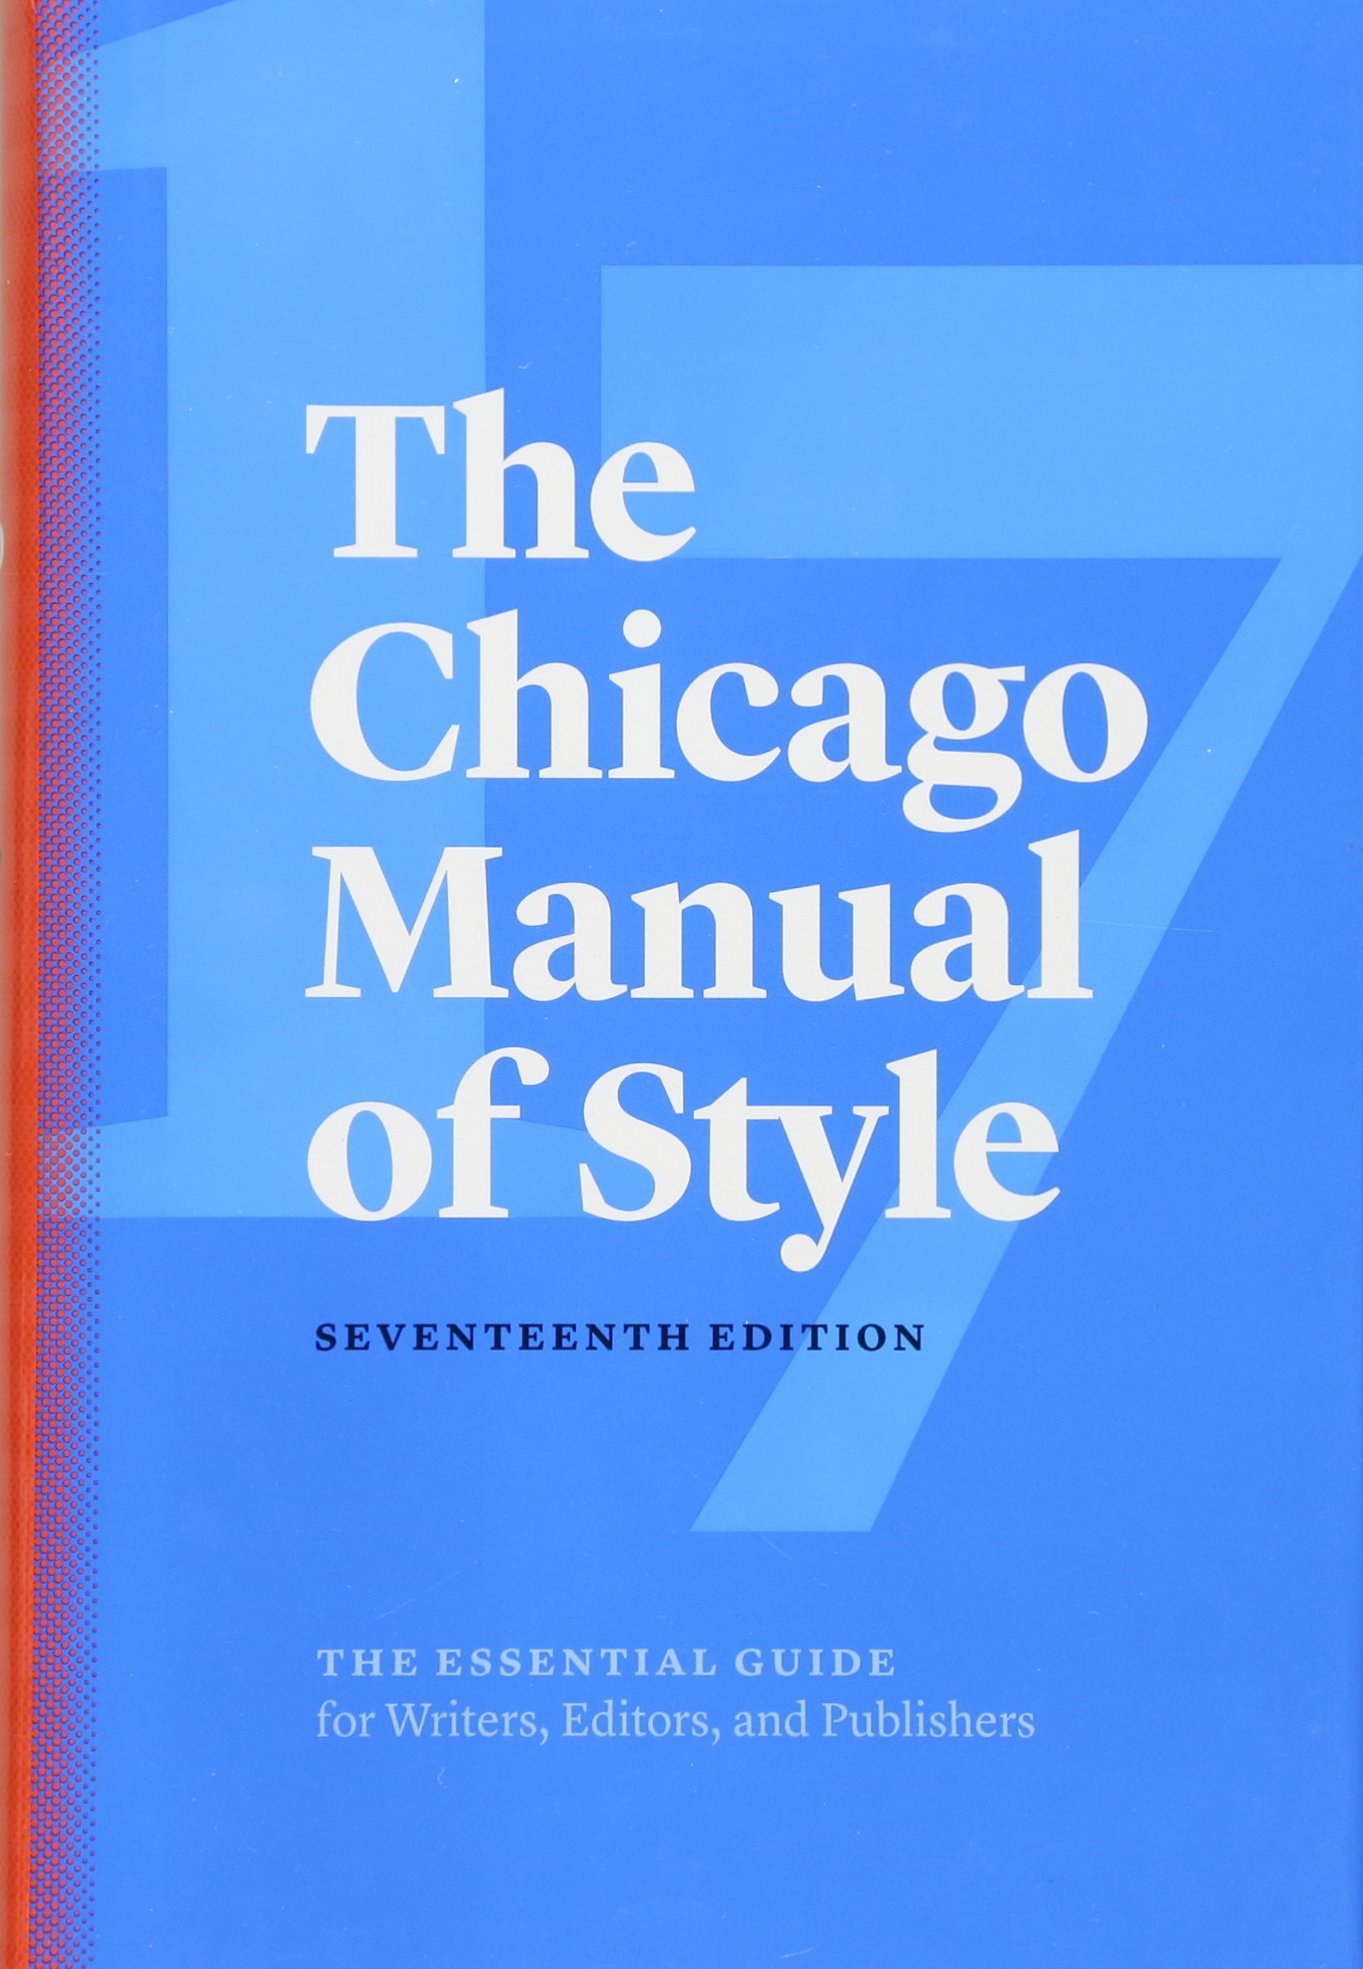 The Chicago Manual of Style | University of Chicago Press